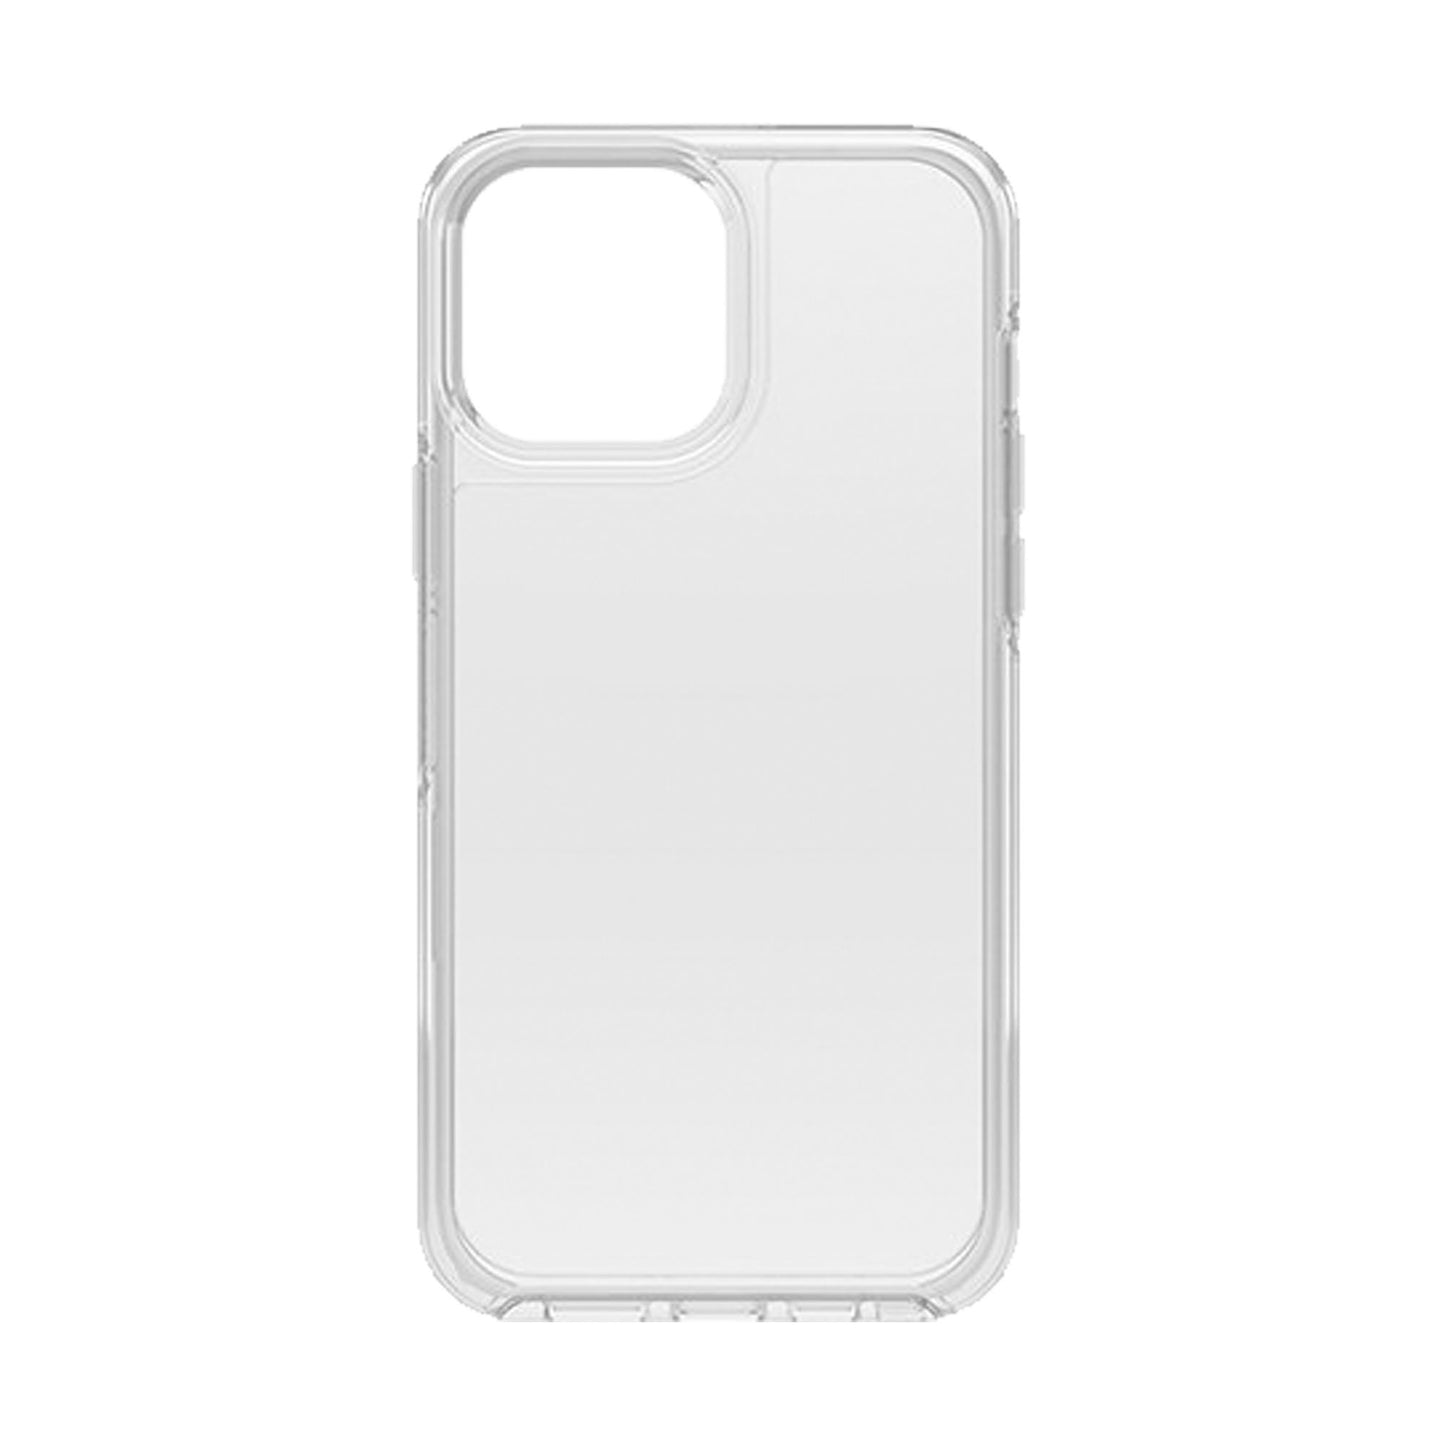 Otterbox Symmetry Clear for iPhone 13 6.1" 5G - Antimicrobial Case - Clear (Barcode: 840104284445 )